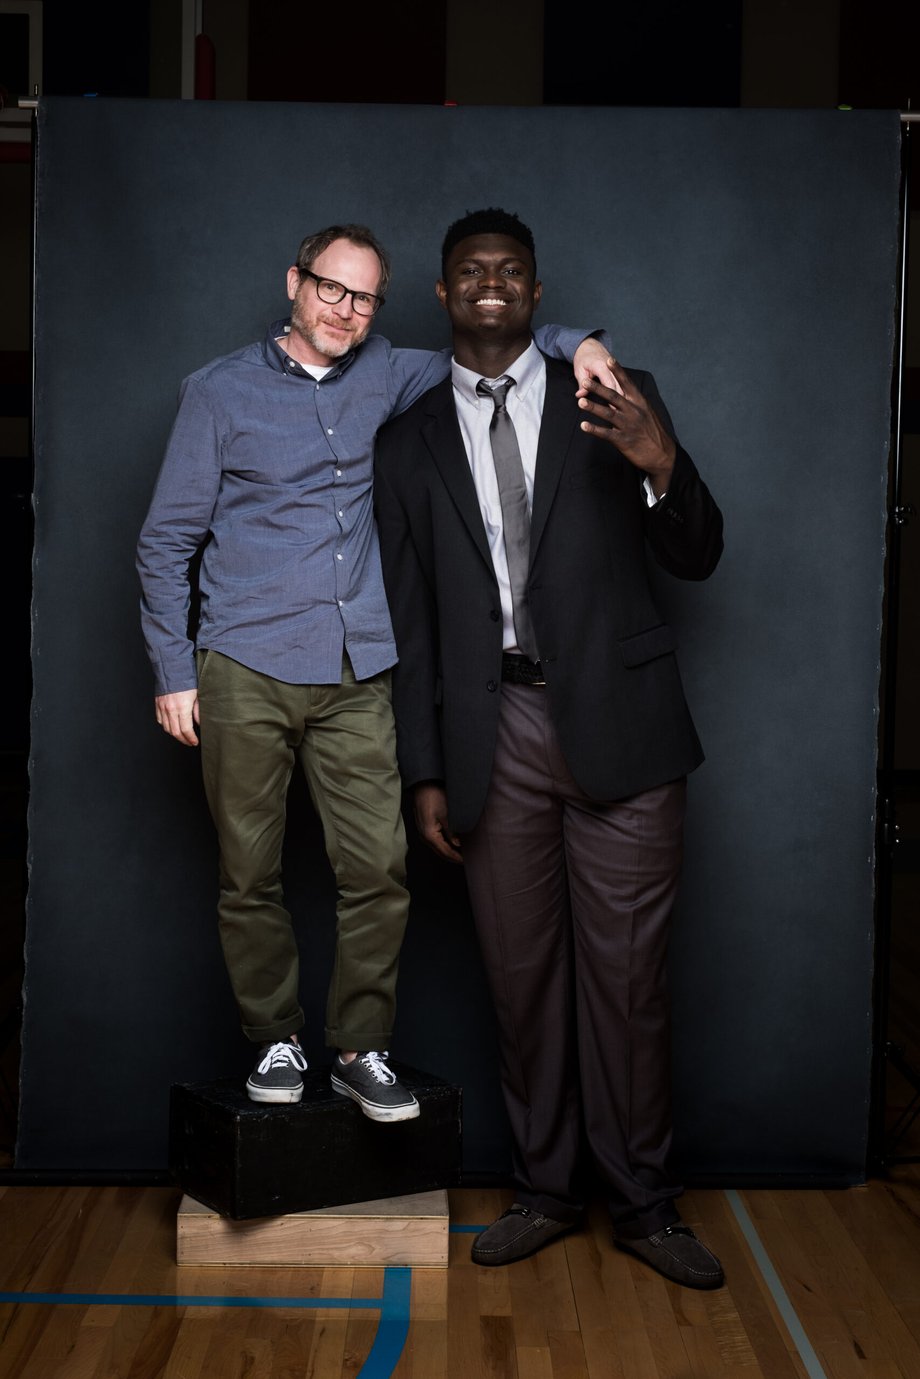 Ian Curcio behind the scenes with Zion Williams capturing a laughable height difference